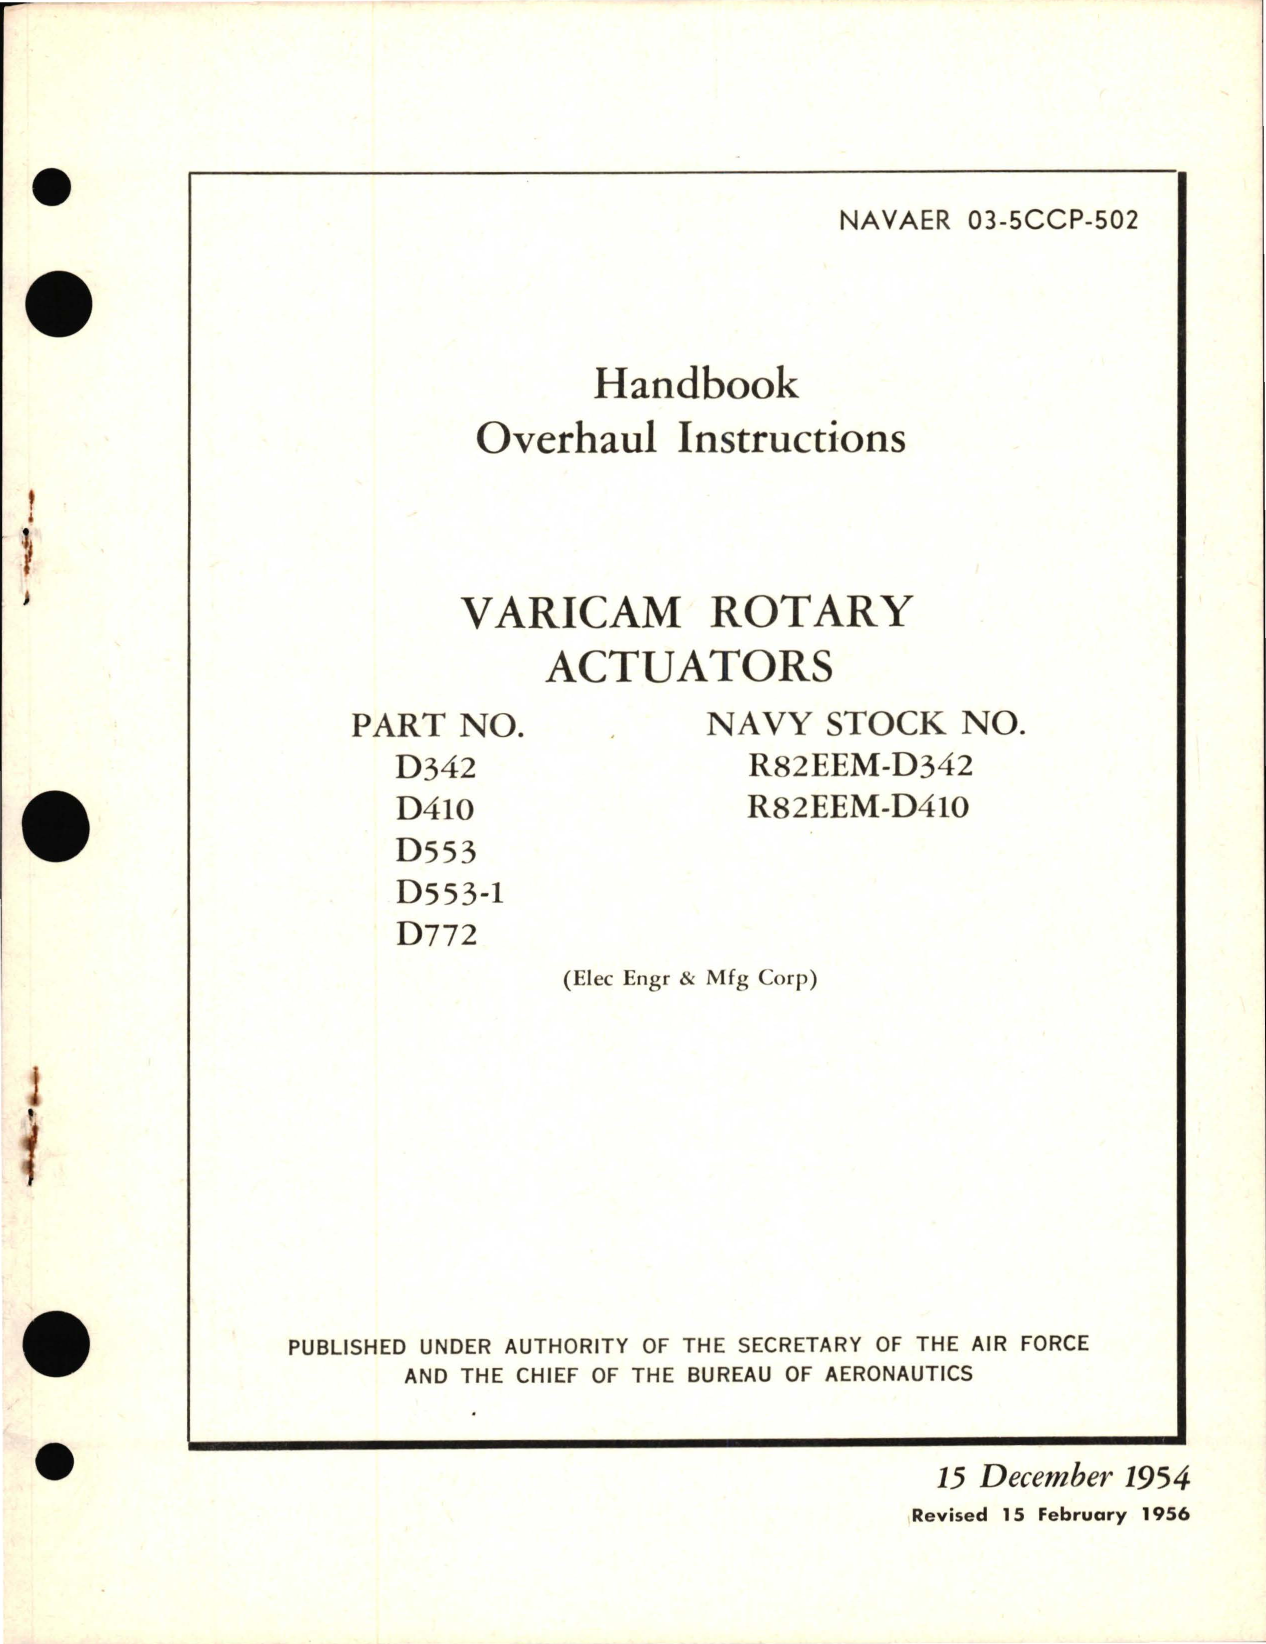 Sample page 1 from AirCorps Library document: Overhaul Instructions for Varicam Rotary Actuators - Part D342, D410, D553, D553-1 and D772 